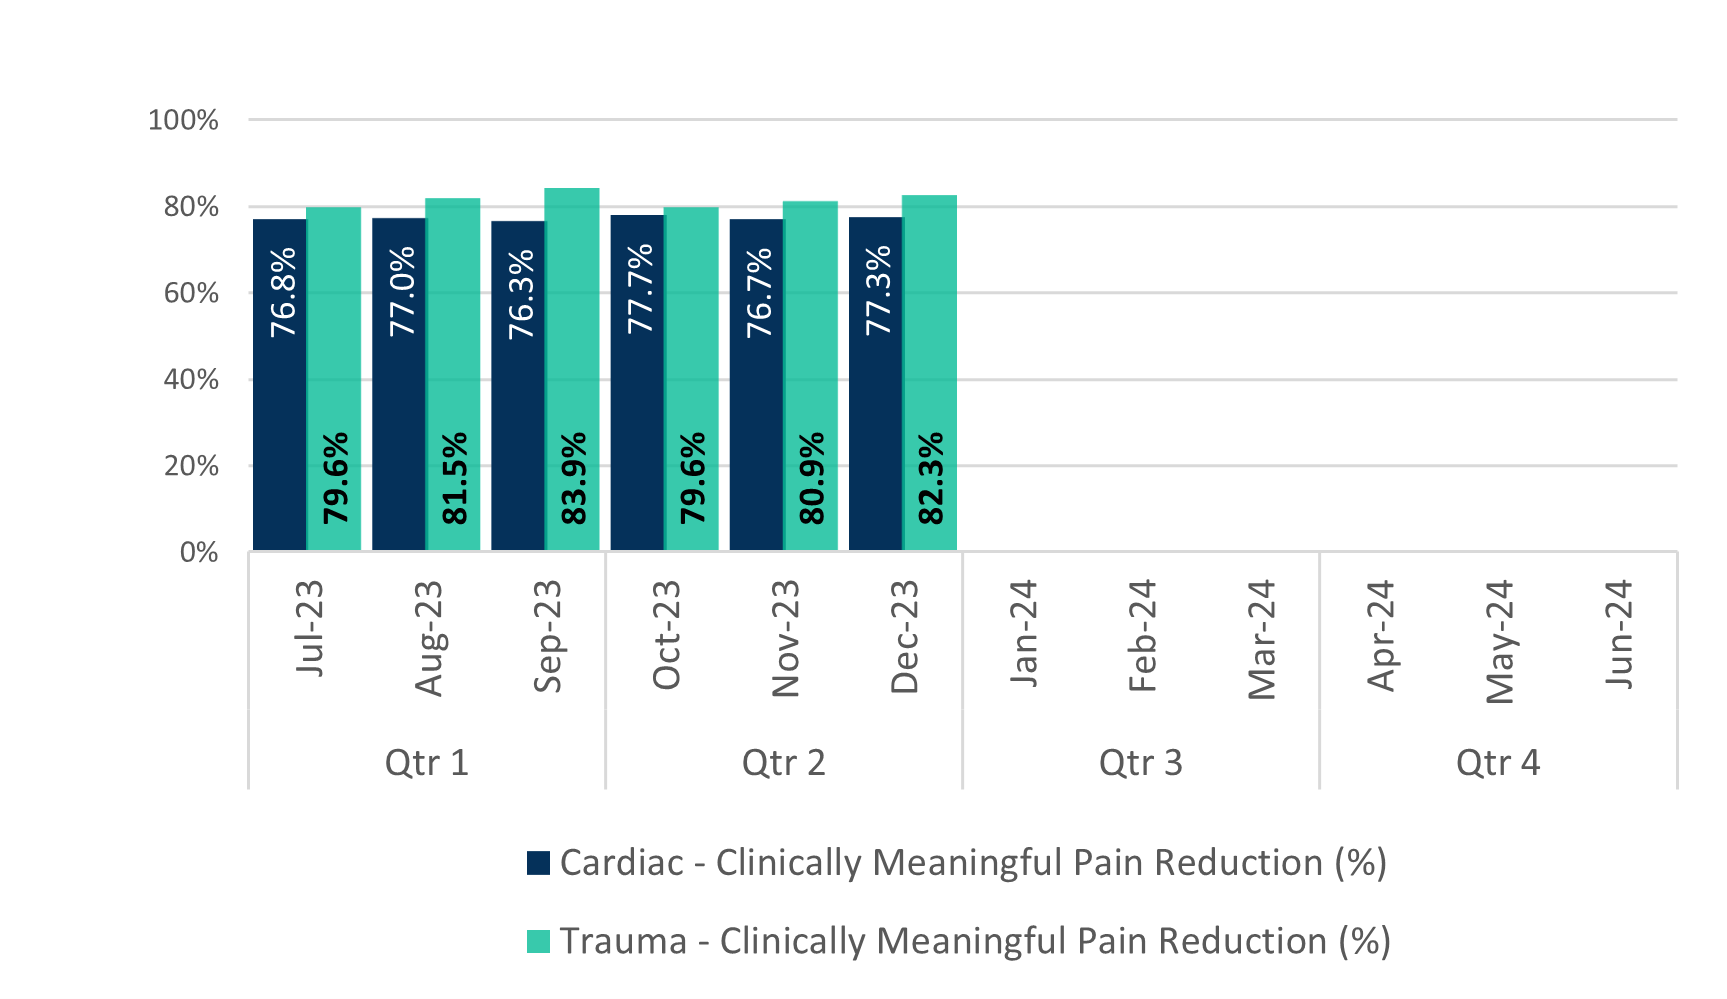 Bar graph showing the clinically meaningful pain reduction % for Cardiac and Trauma patients by month. Cardiac pain reduction % was 77.7% for Oct-23, 76.7% for Nov-23, and 82.3% for Dec-23. Trauma pain reducation % was 79.6% for Oct-23, 80.9% for Nov-23, and 82.3% for Dec-23. 